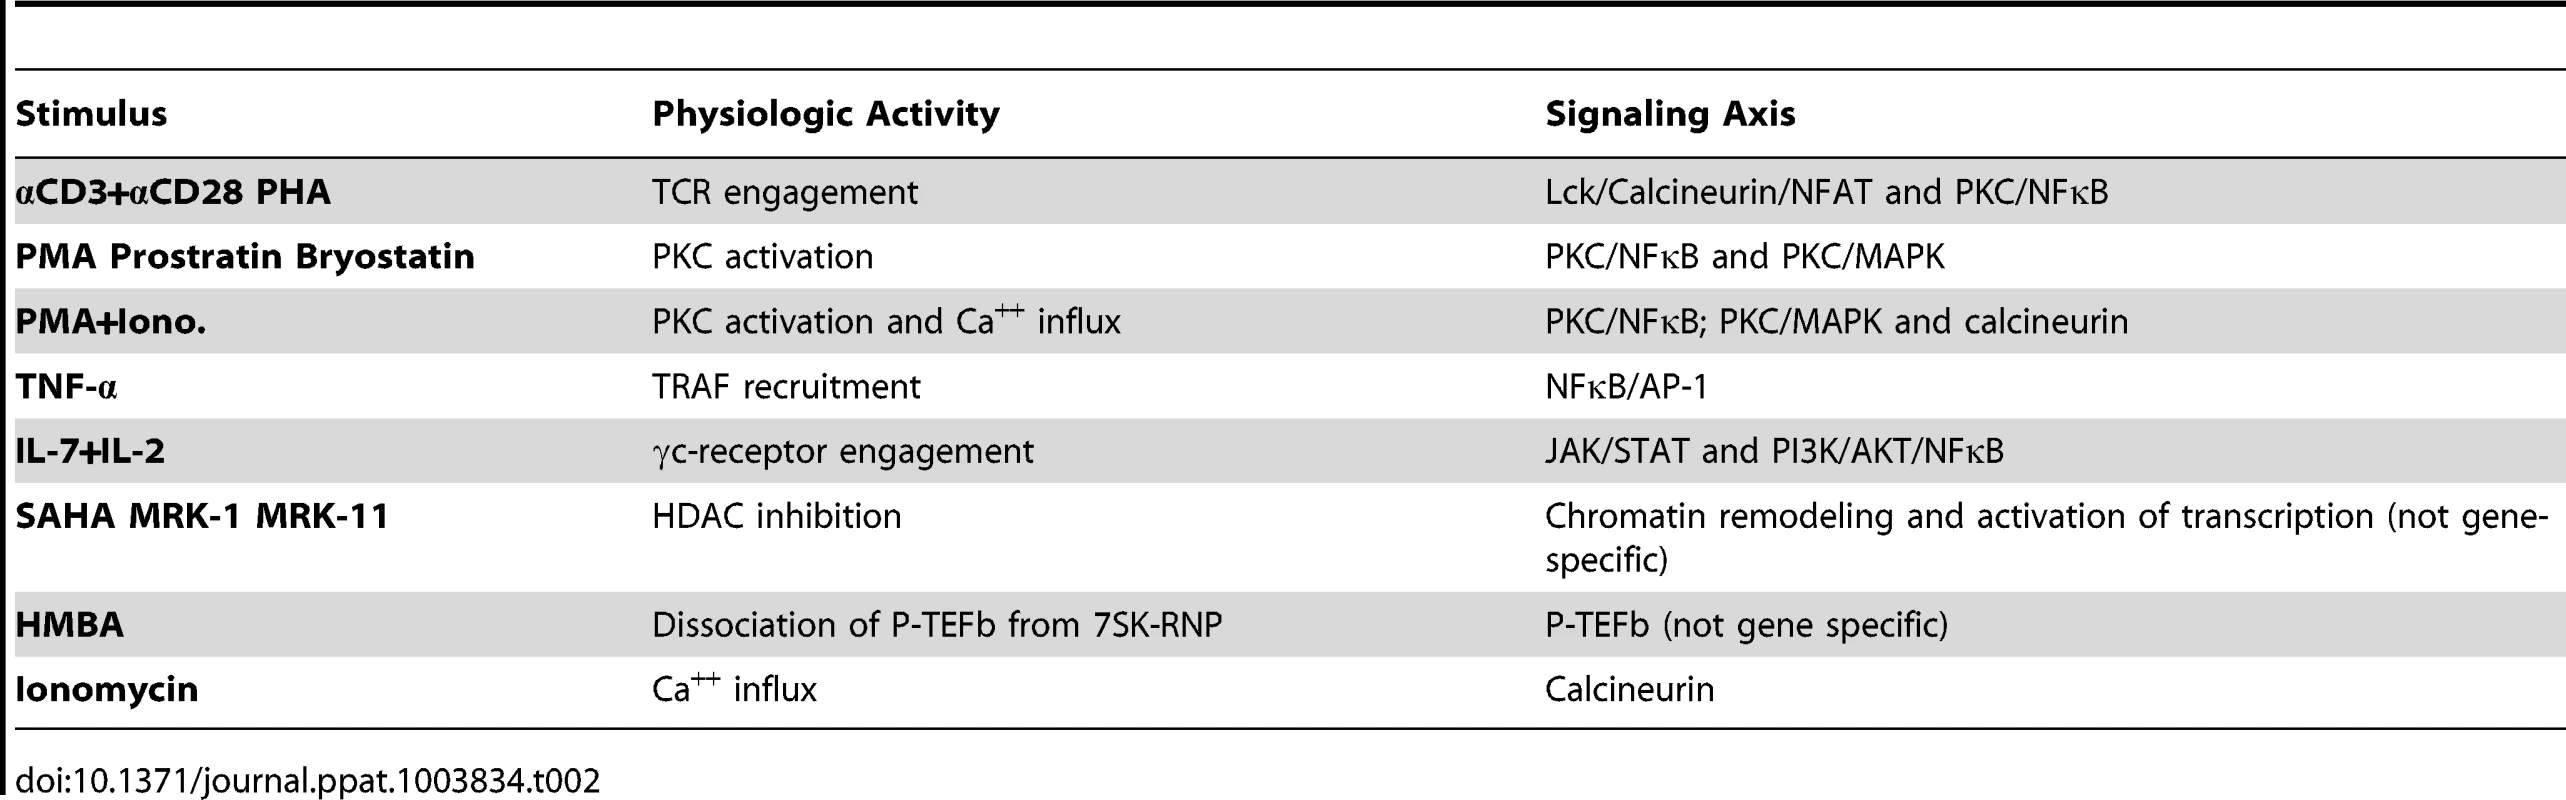 List of stimuli used in this study and their corresponding signaling pathways.